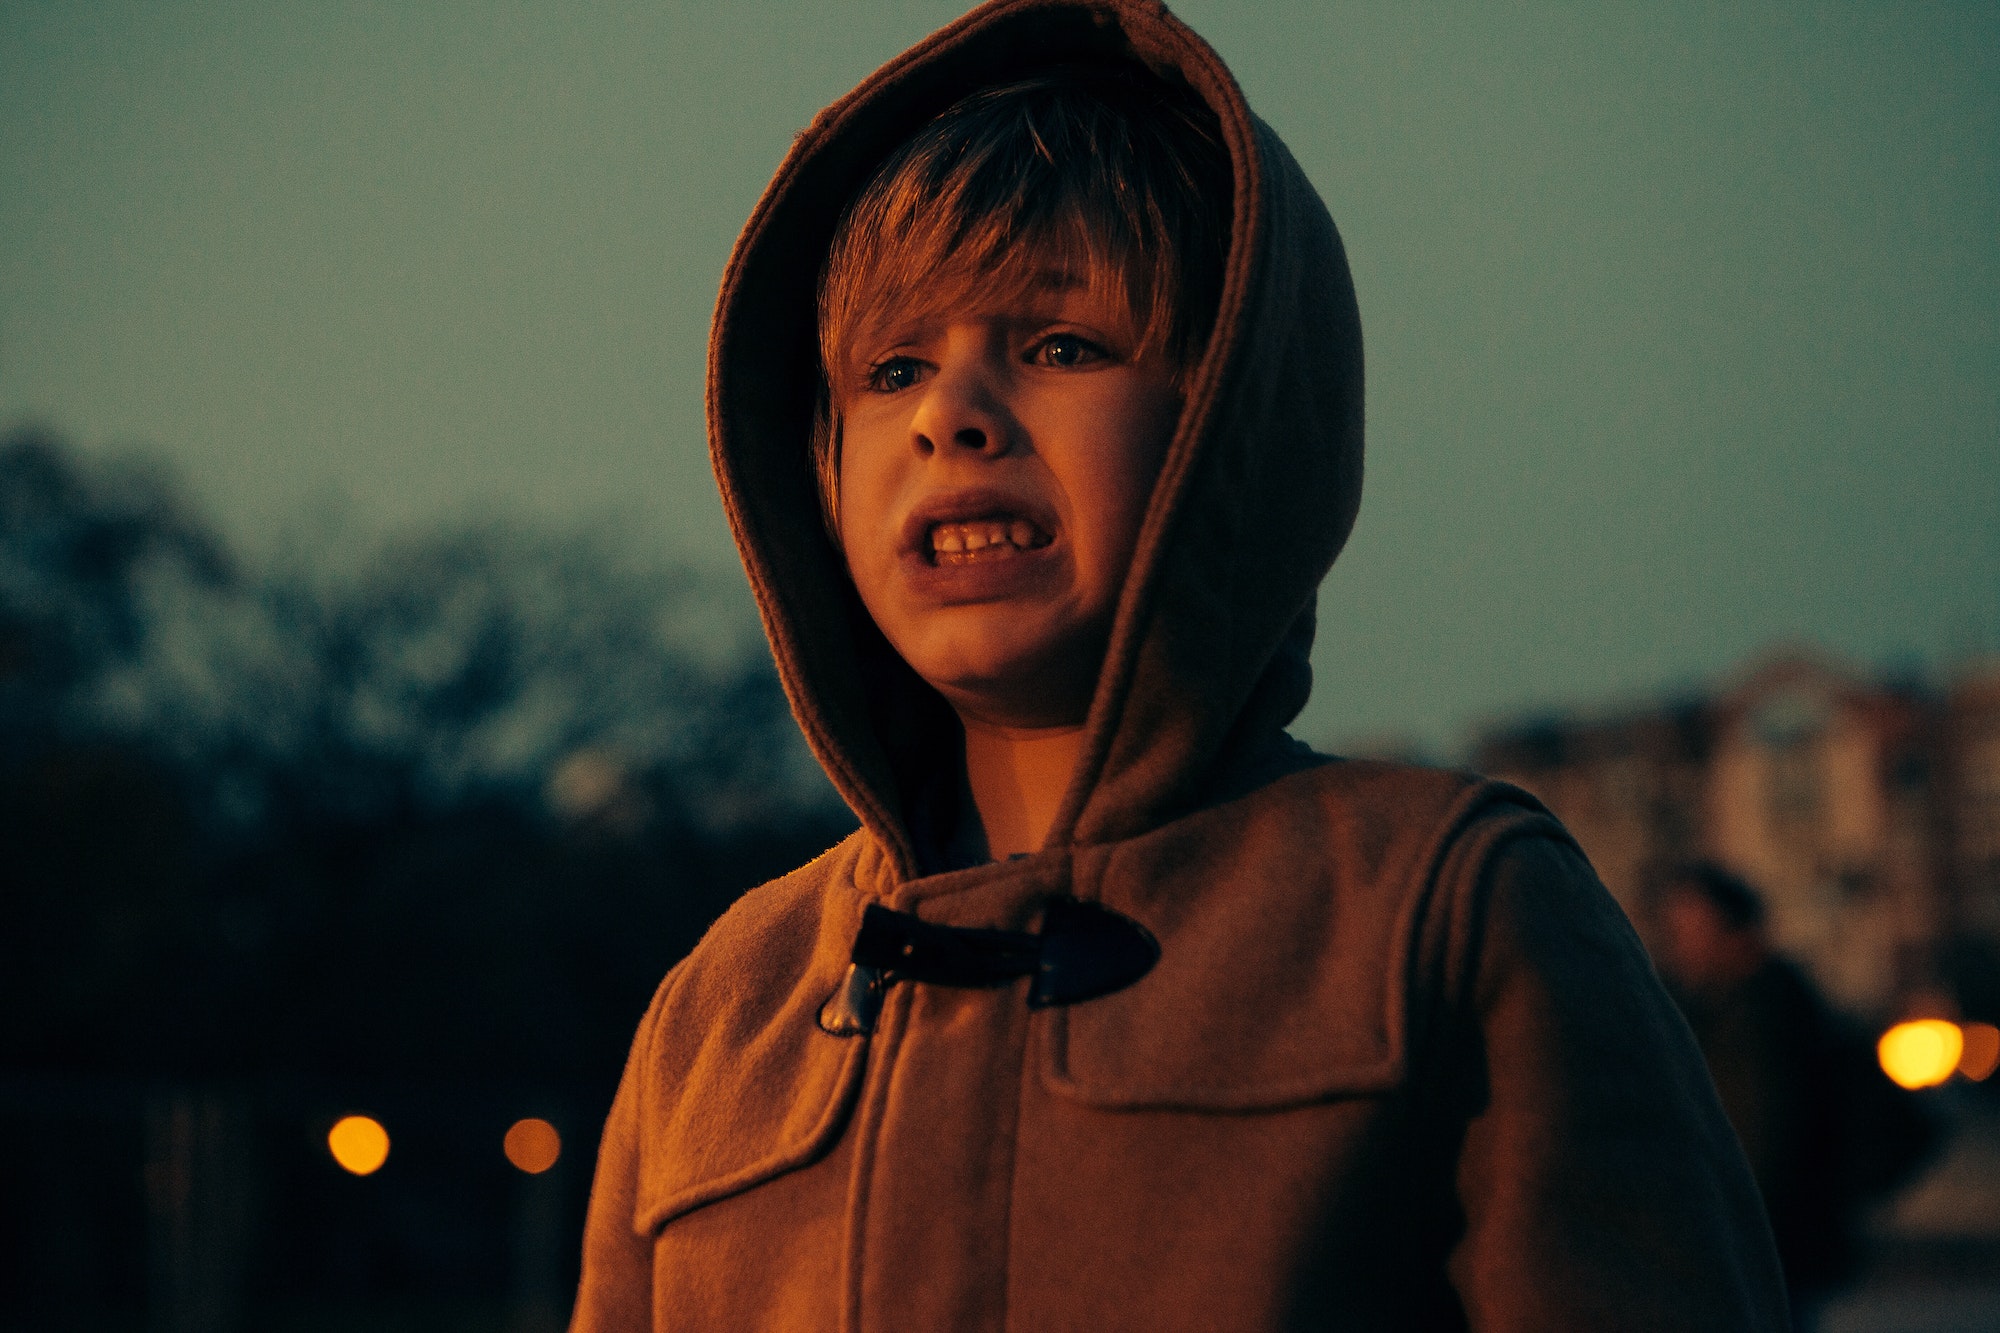 Portrait of a distressed child with a hood over his head at dusk.